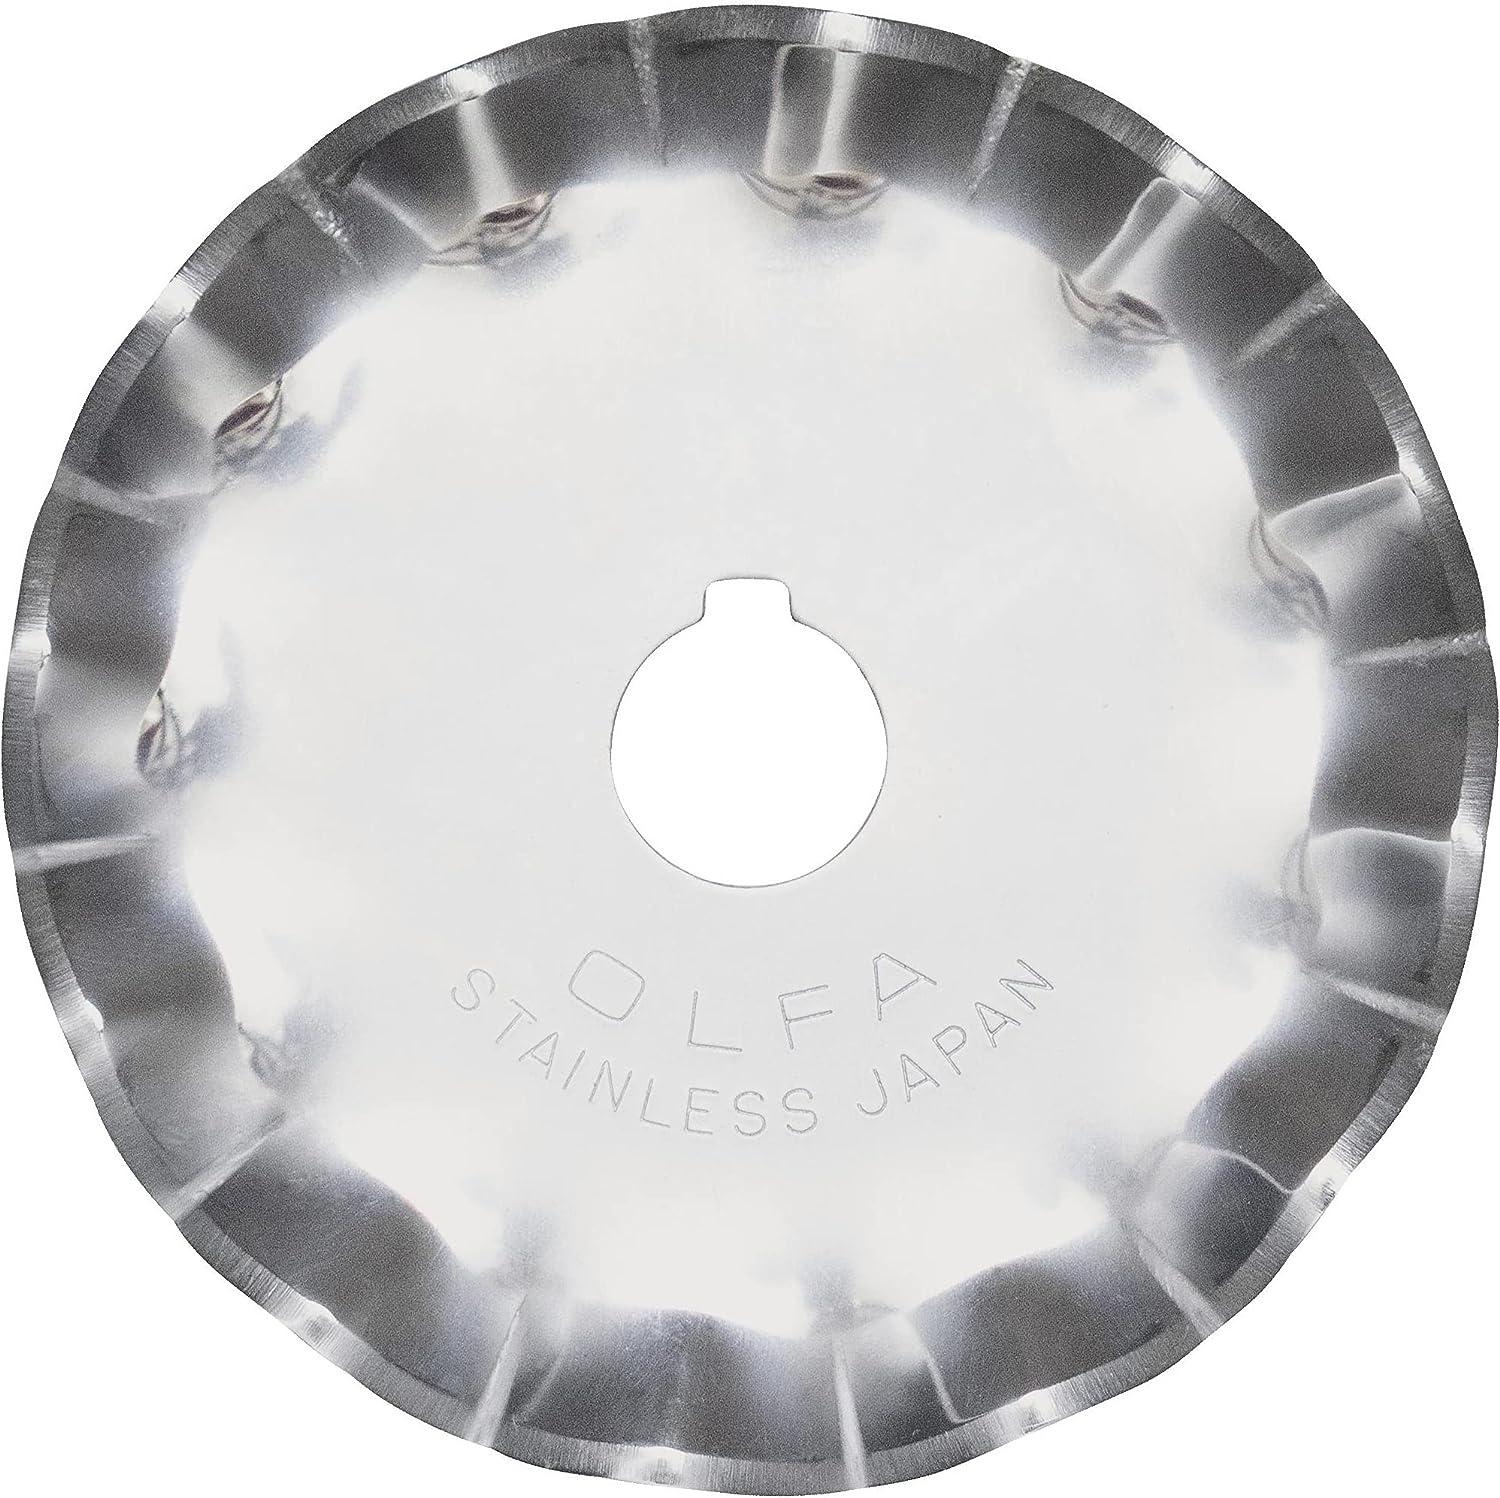 OLFA 60mm Rotary Cutter Replacement Blade, 1 Blade (RB60H-1) - Tungsten  Steel Endurance Circular Rotary Fabric